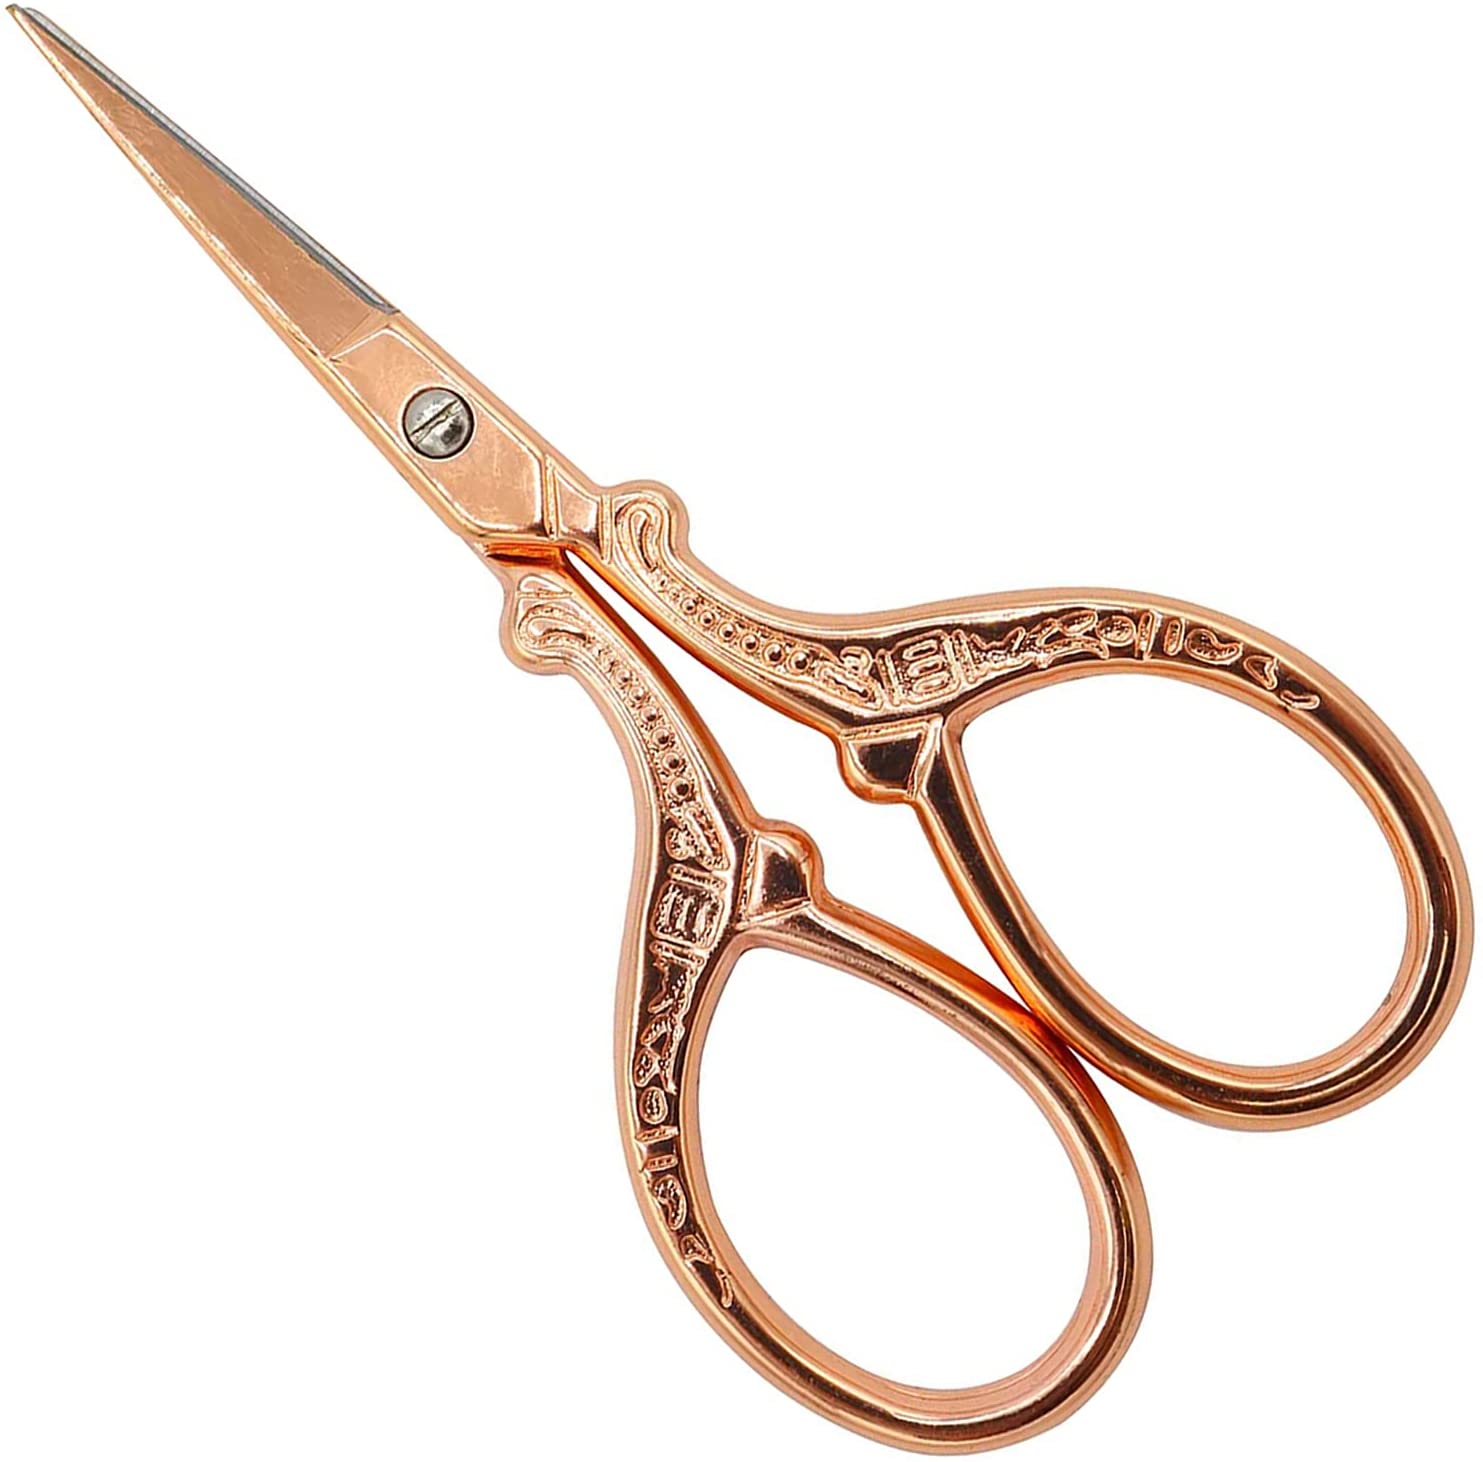 1 Pack Antique Vintage Style Scissors Cutter Cutting Embroidery Cross Stitch Sewing Tool - Rose Gold Small Scissors for Office Kids Pack Bulk (Mini